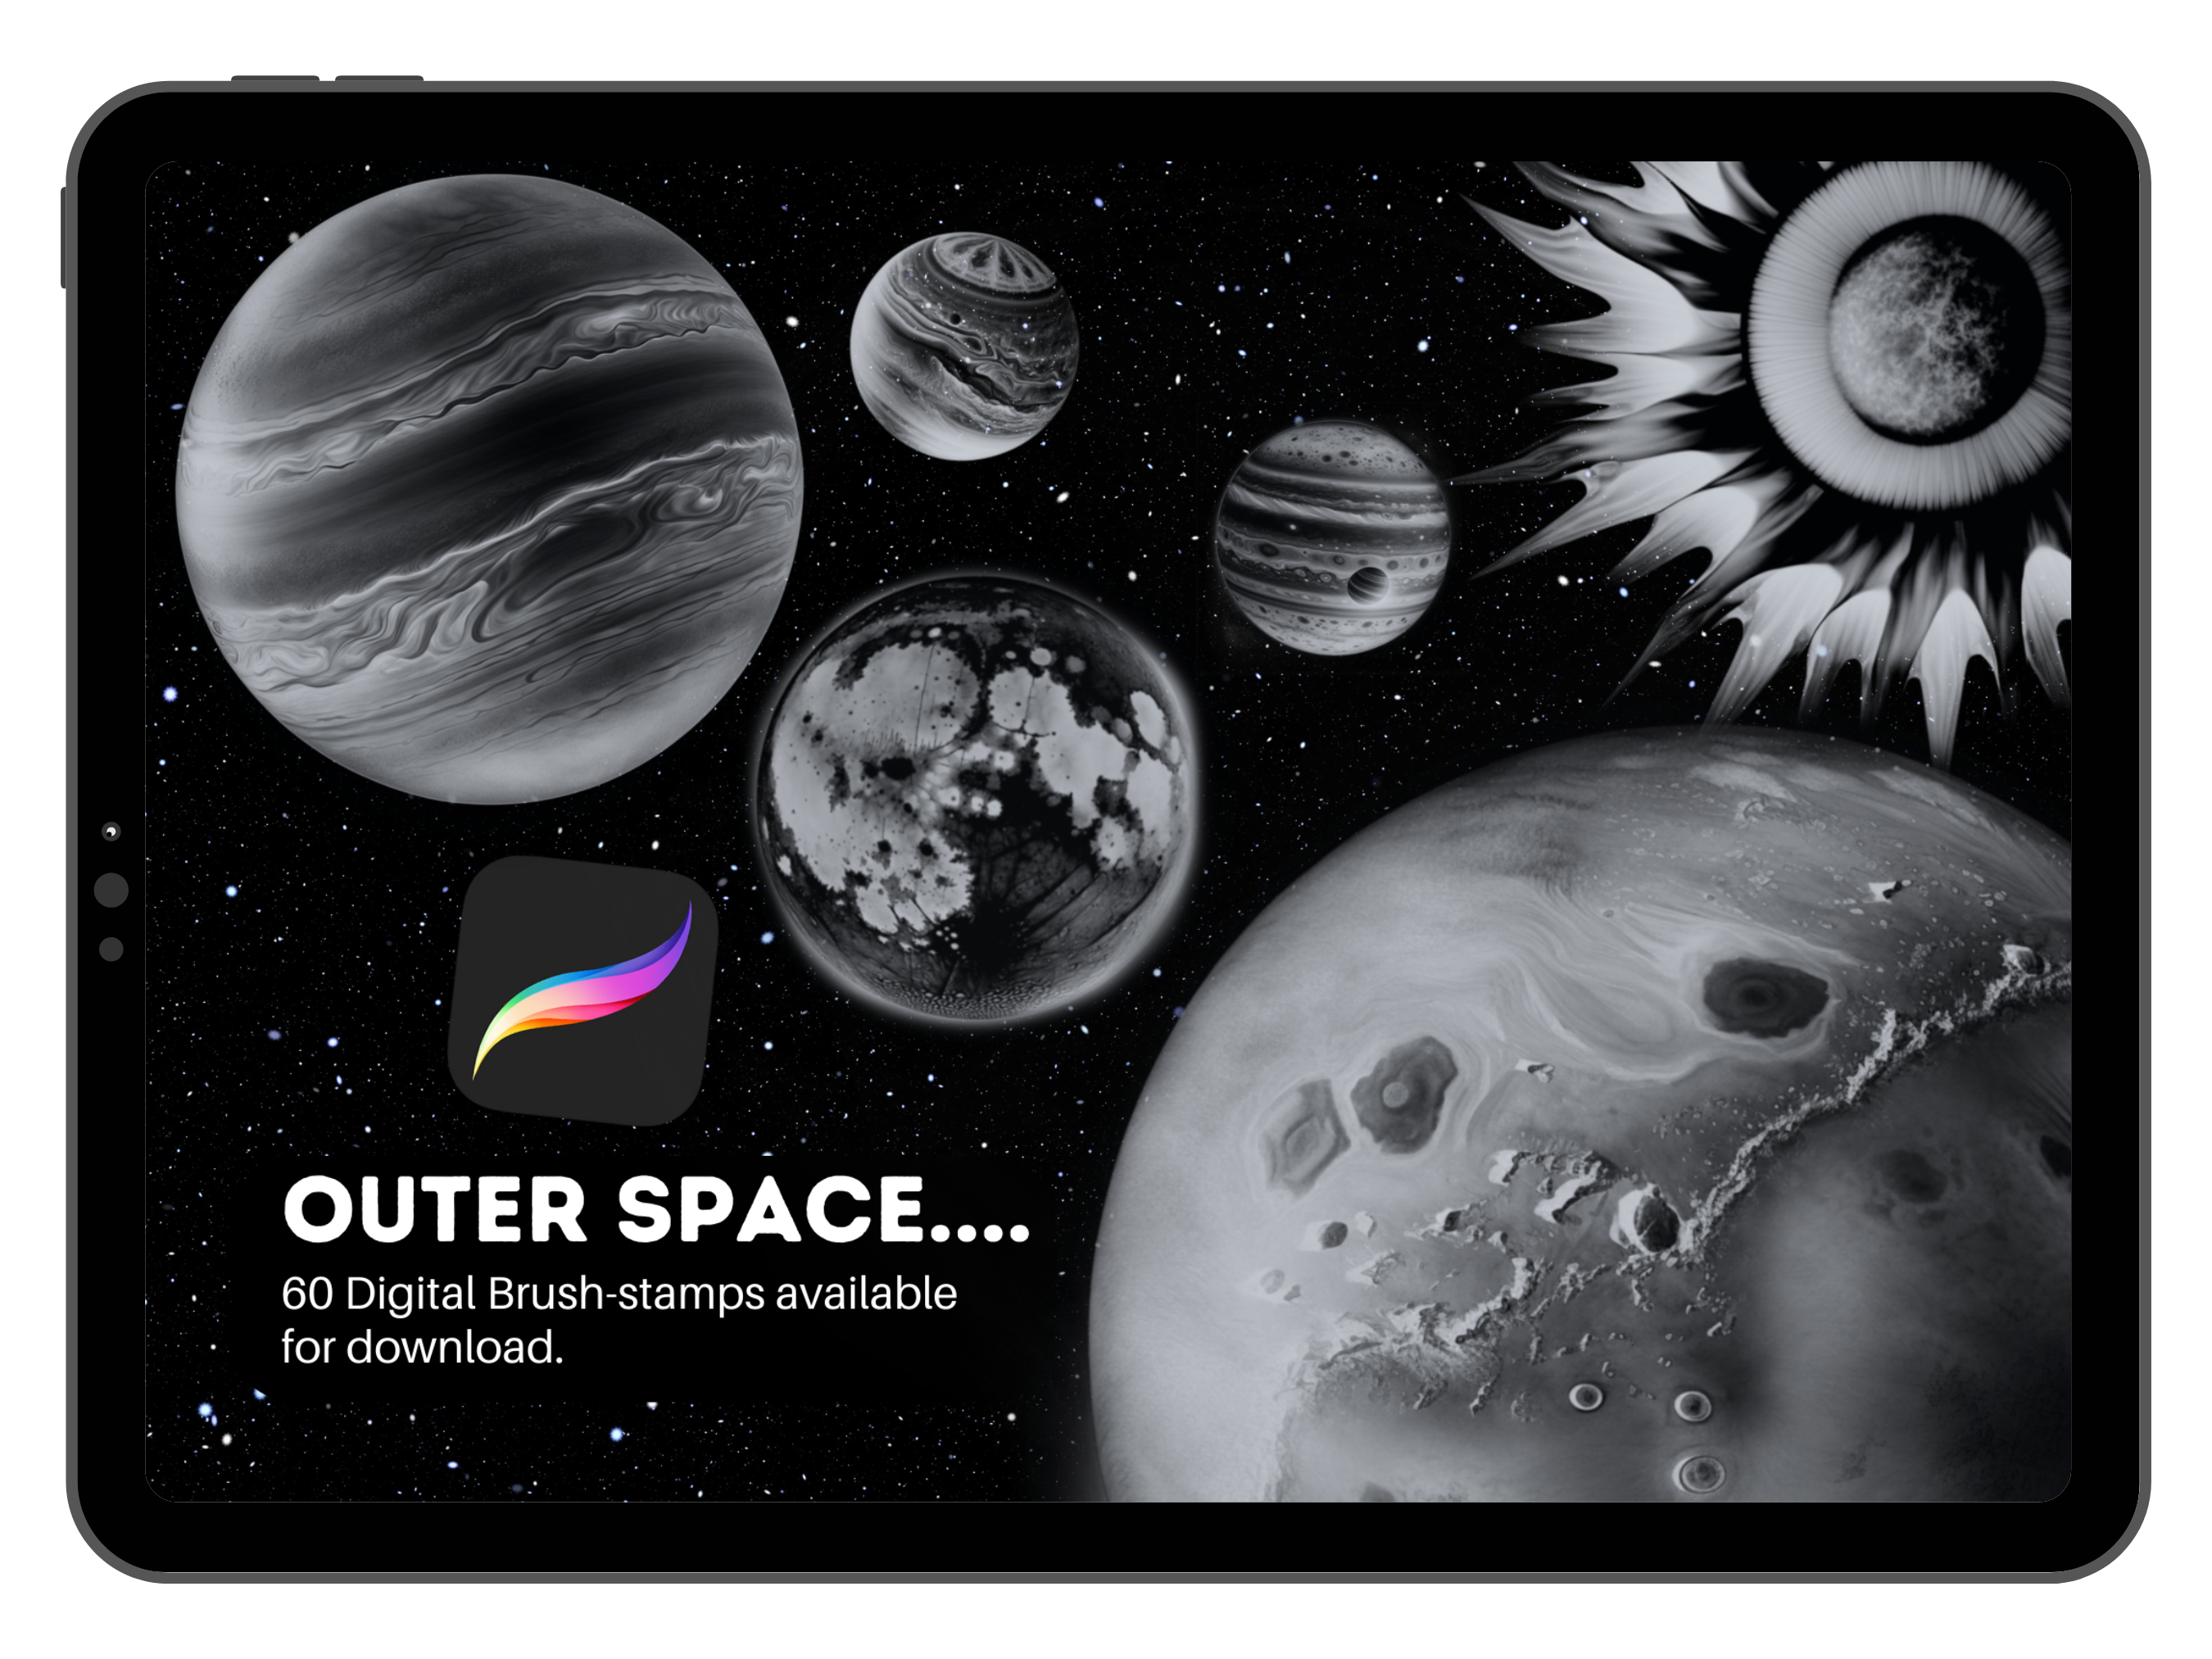 Outer Space (planets) 60 Brush-Stamps | Downloadable Pro-Create Brush-sets